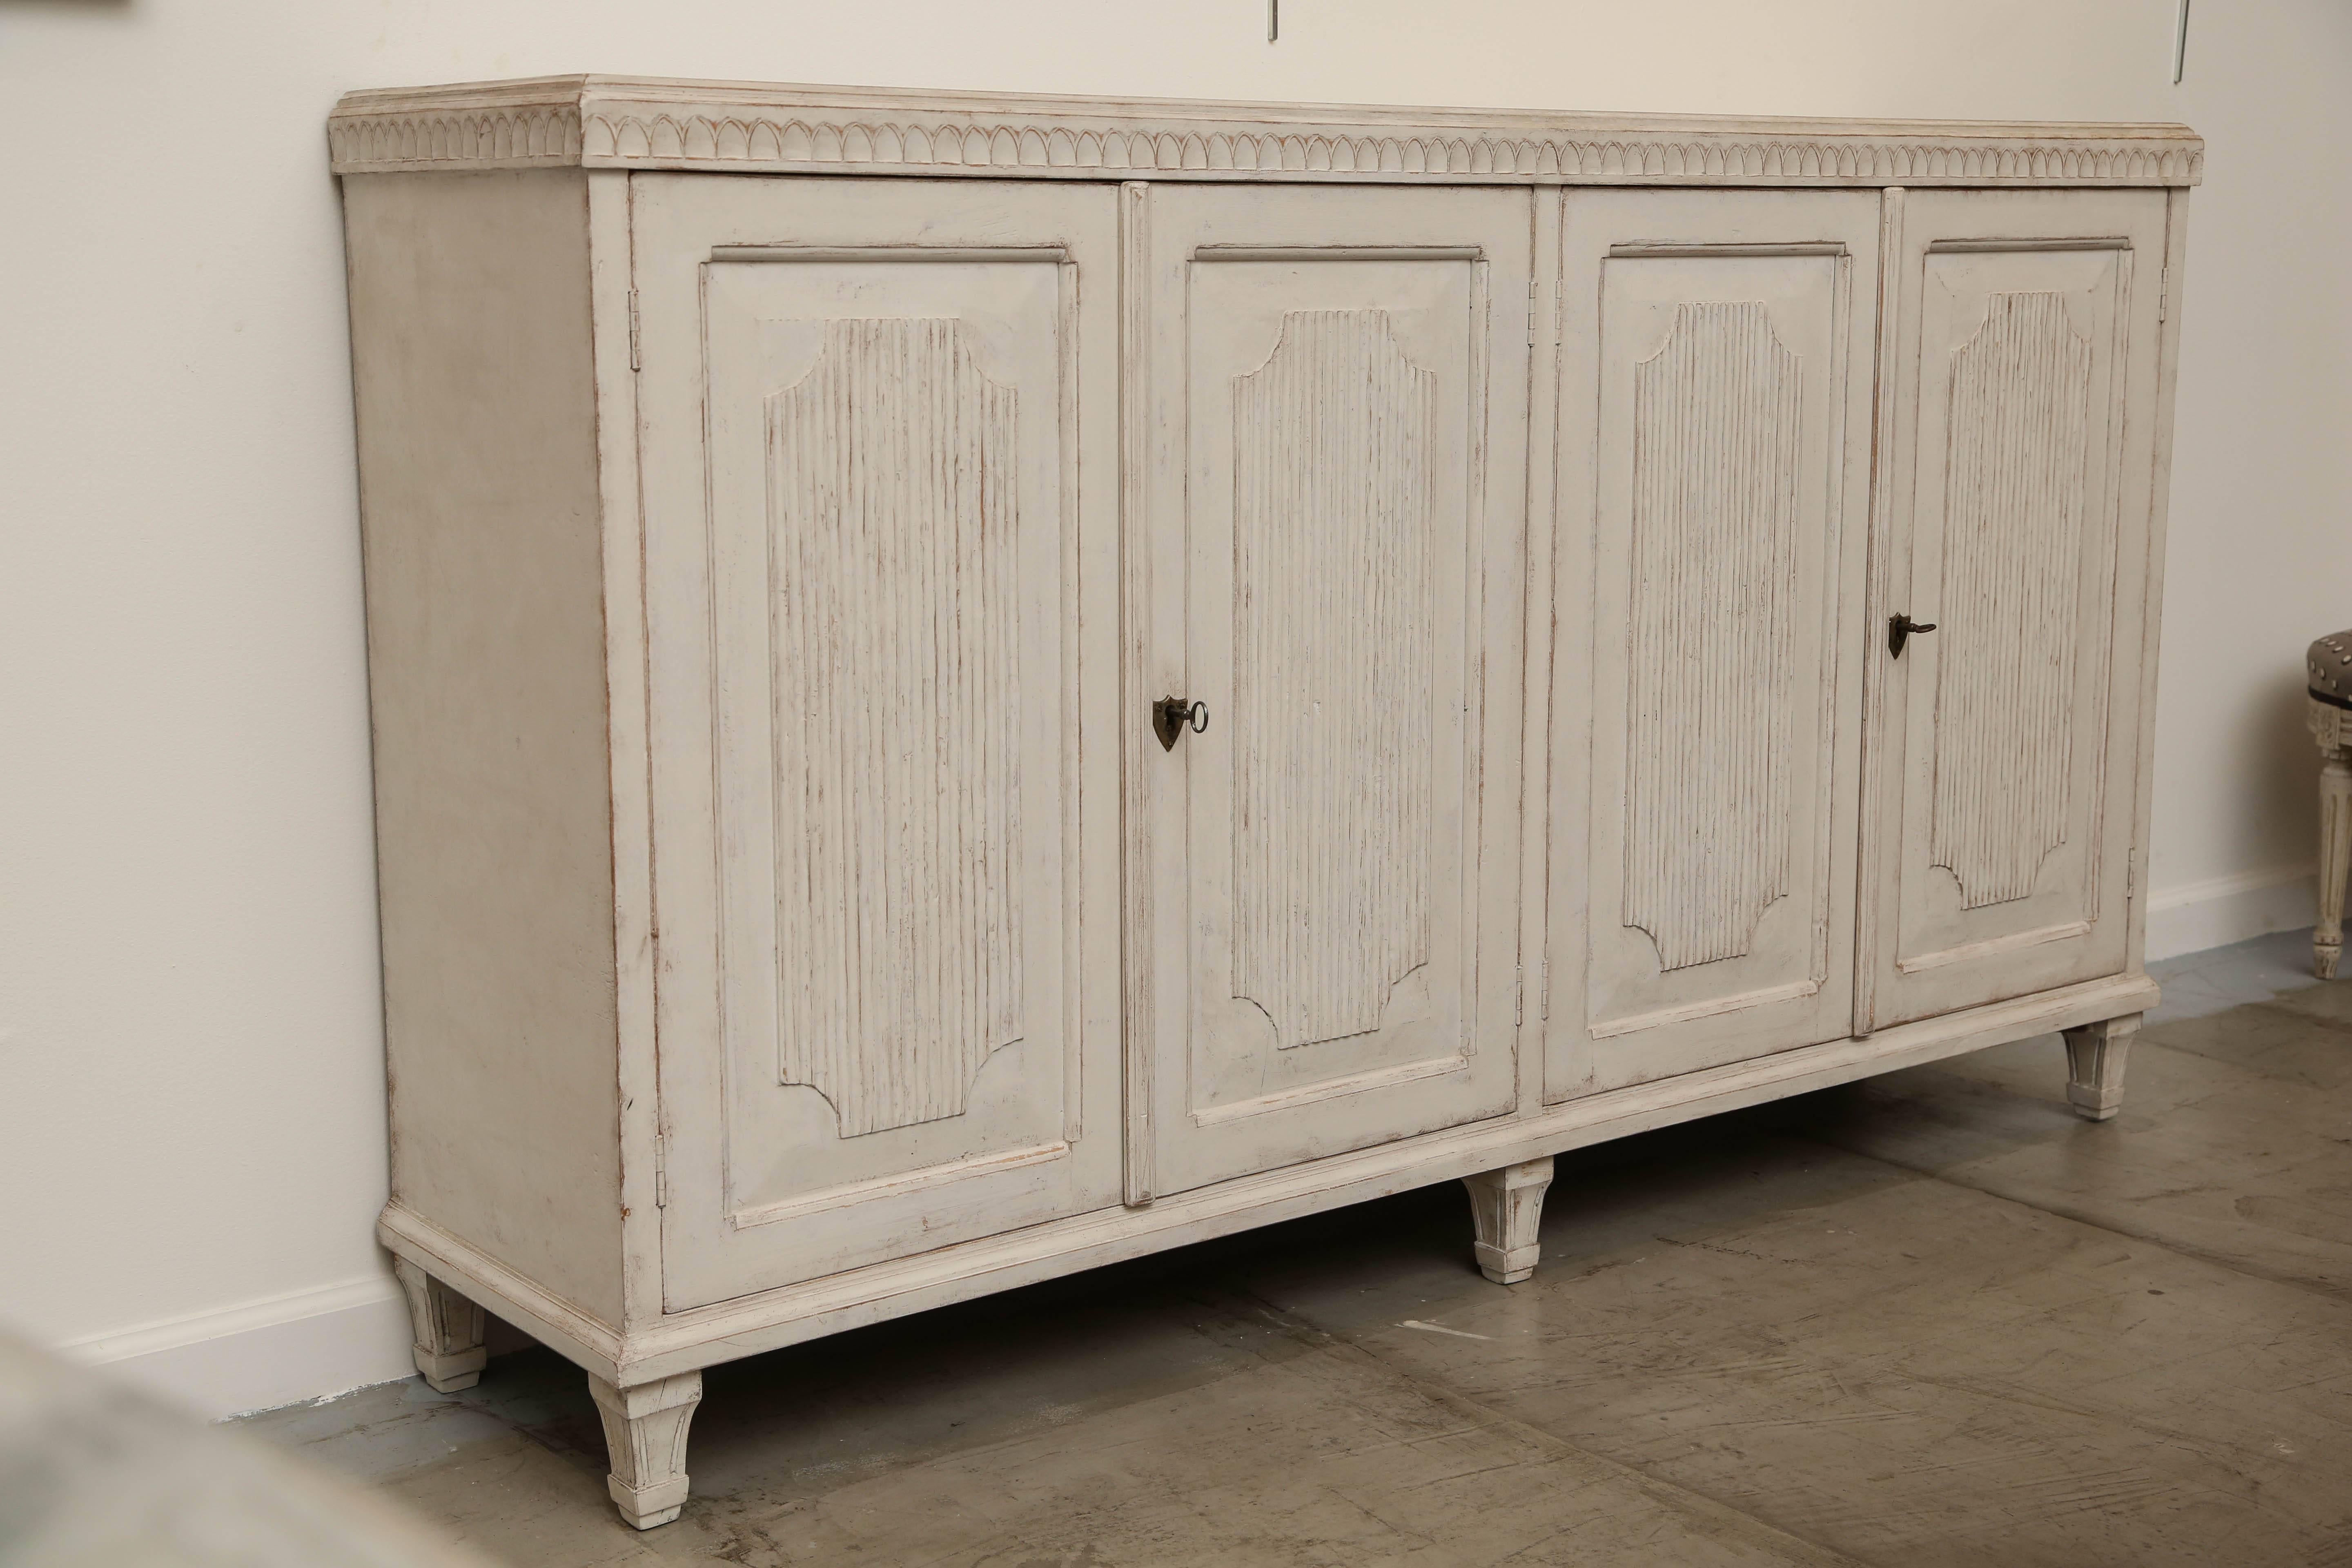 19th Century Antique Swedish Gustavian Painted Sideboard with Four Raised Panel Doors